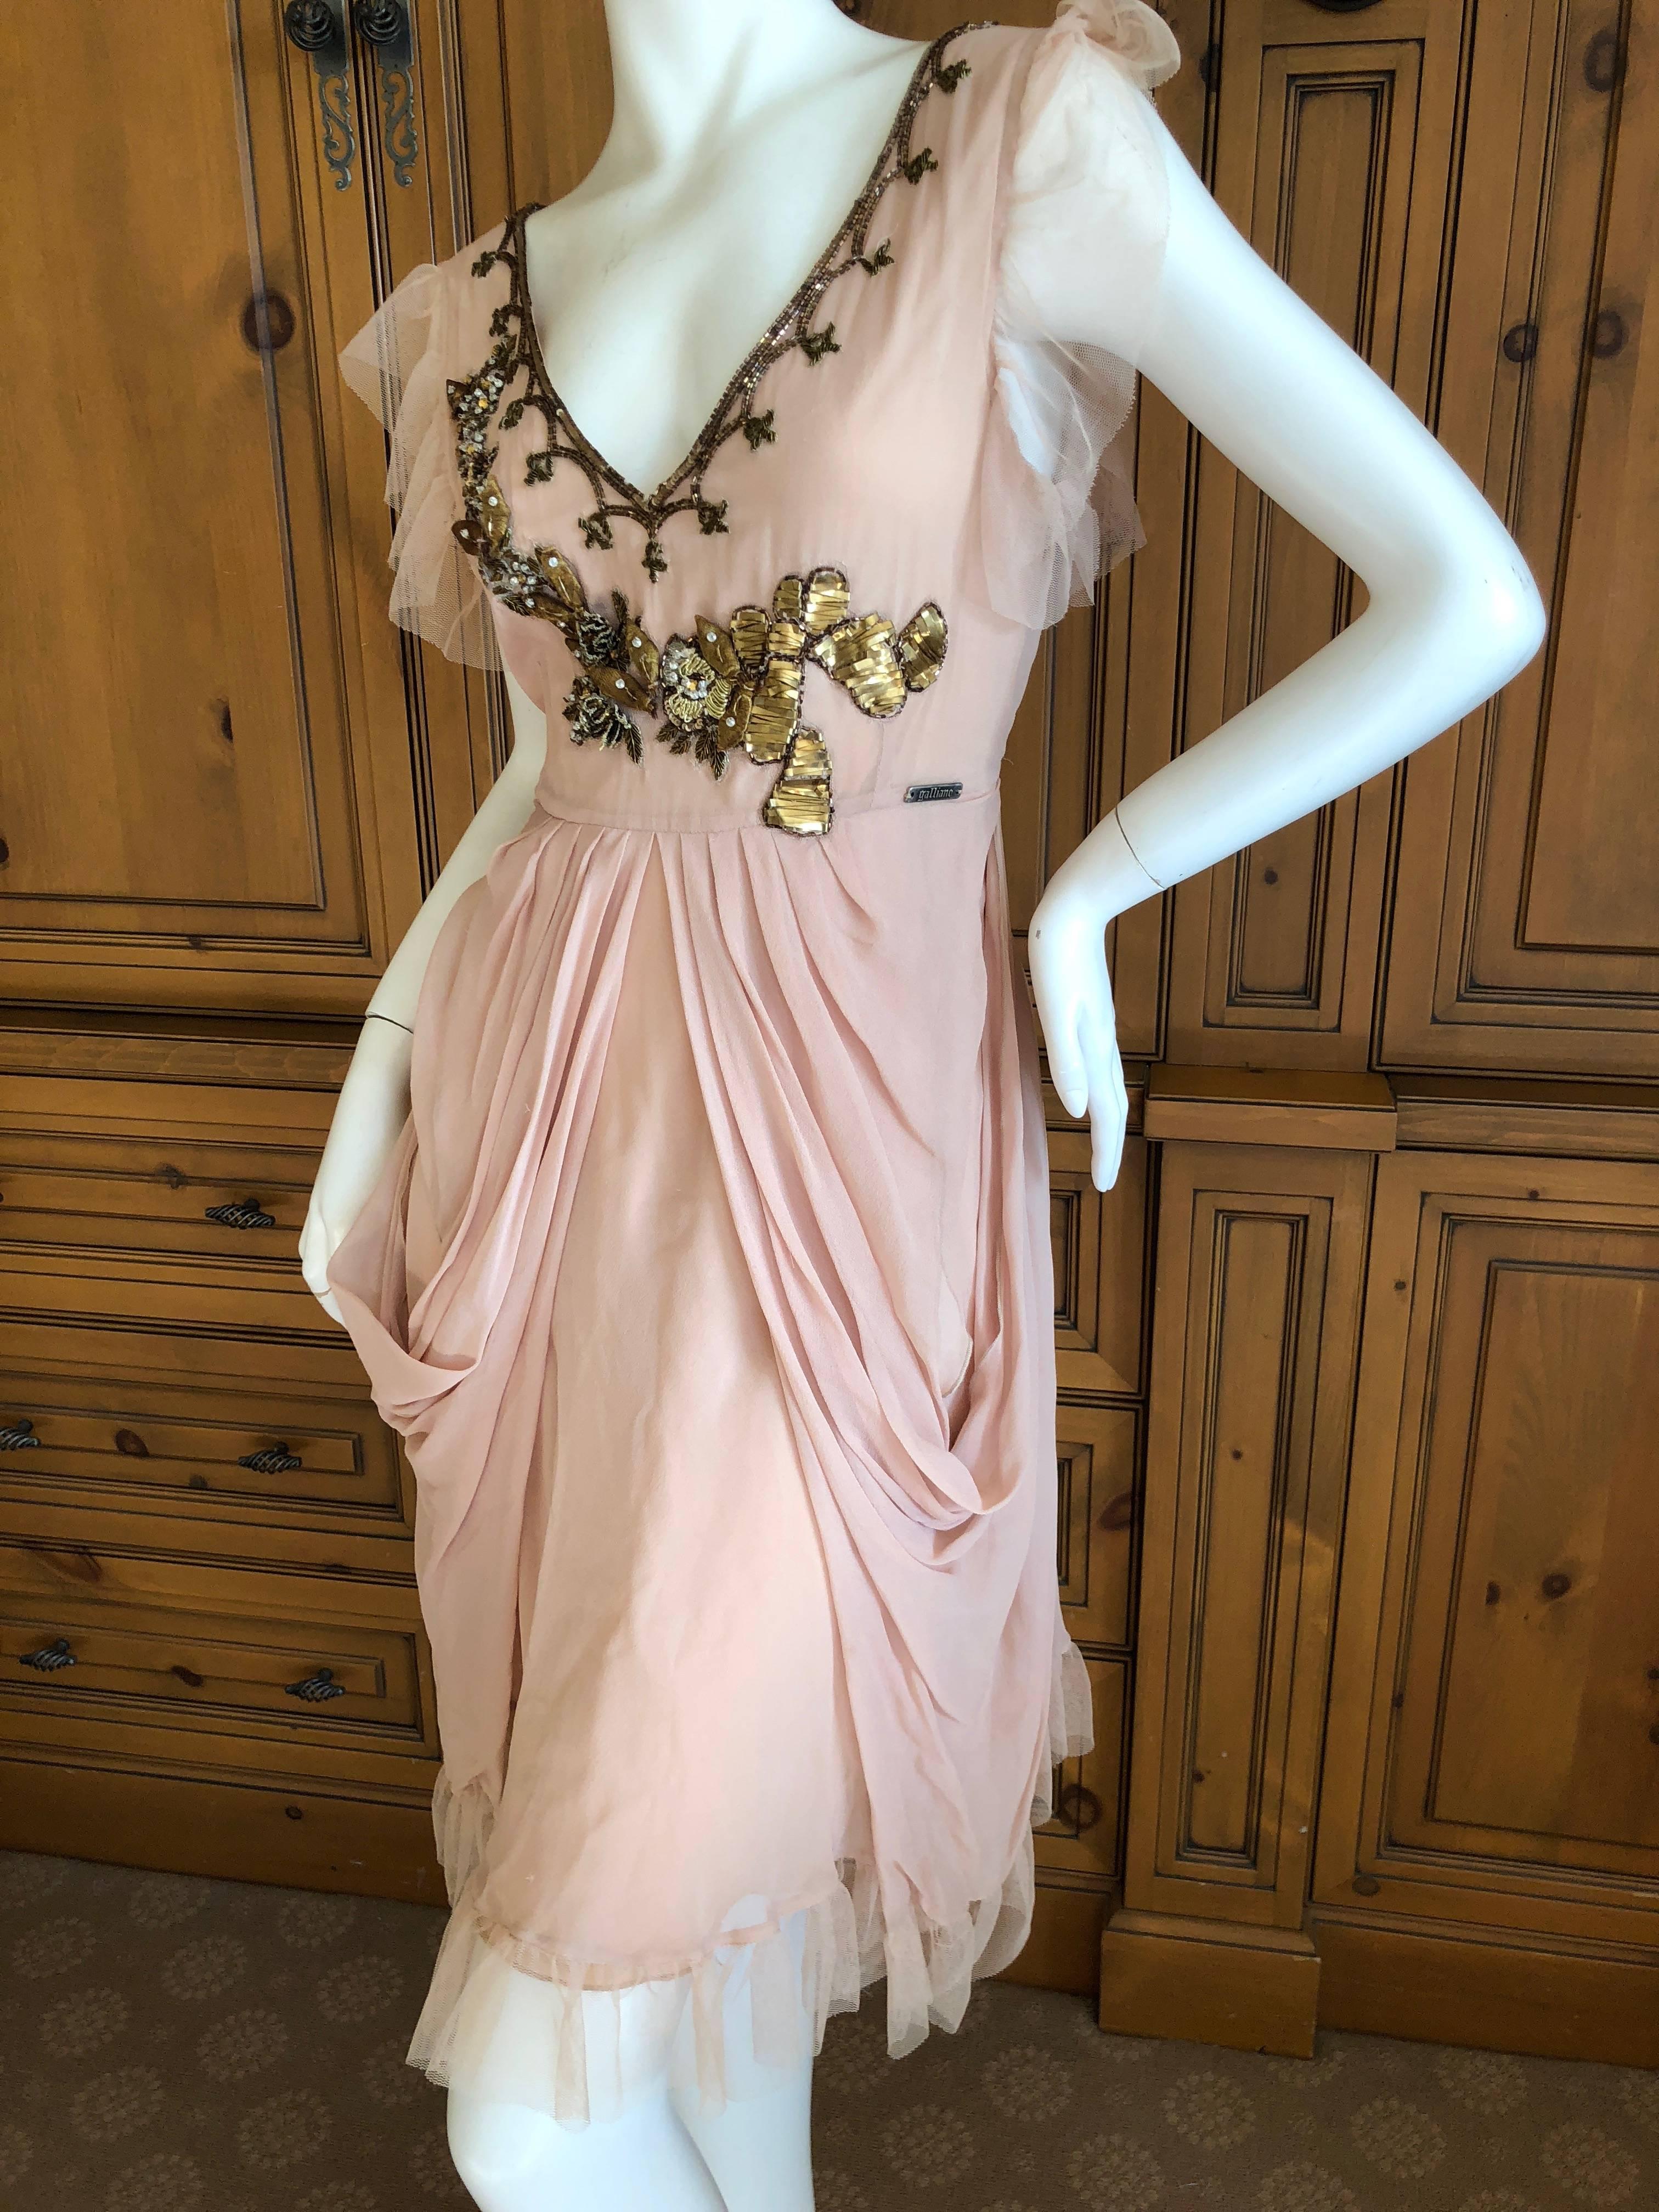 Wonderful tan cocktail dress with the most incredible embellishments from John Galliano .
New with tags.
Size 42
Bust 36